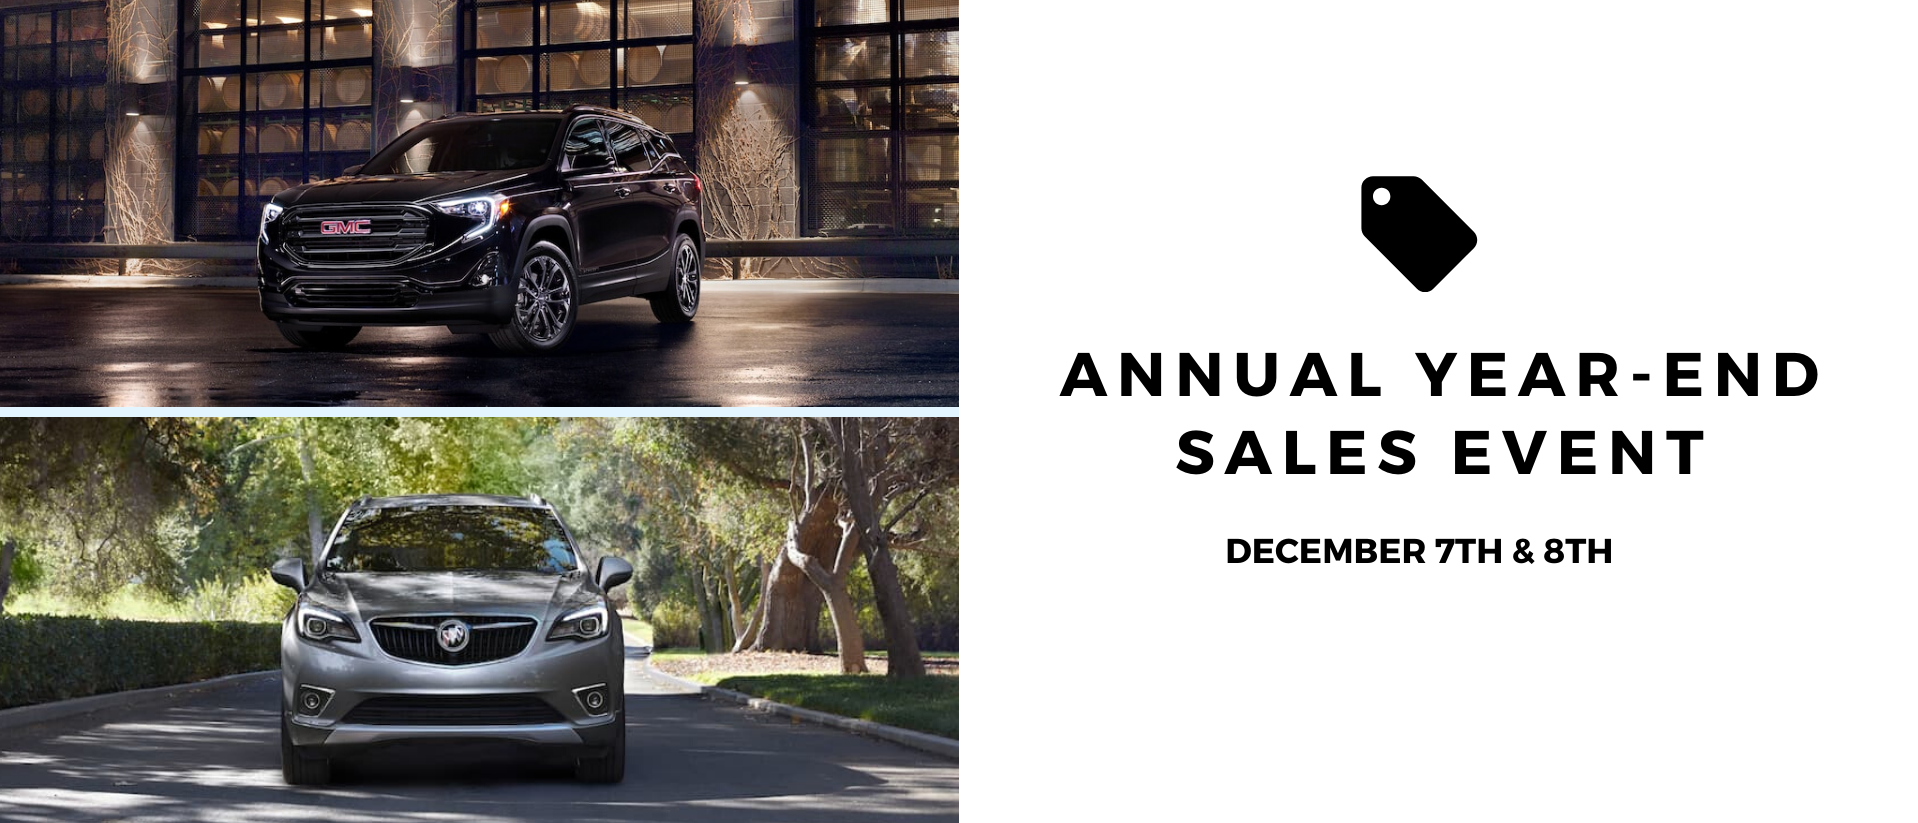 Annual Year-End Sales Event